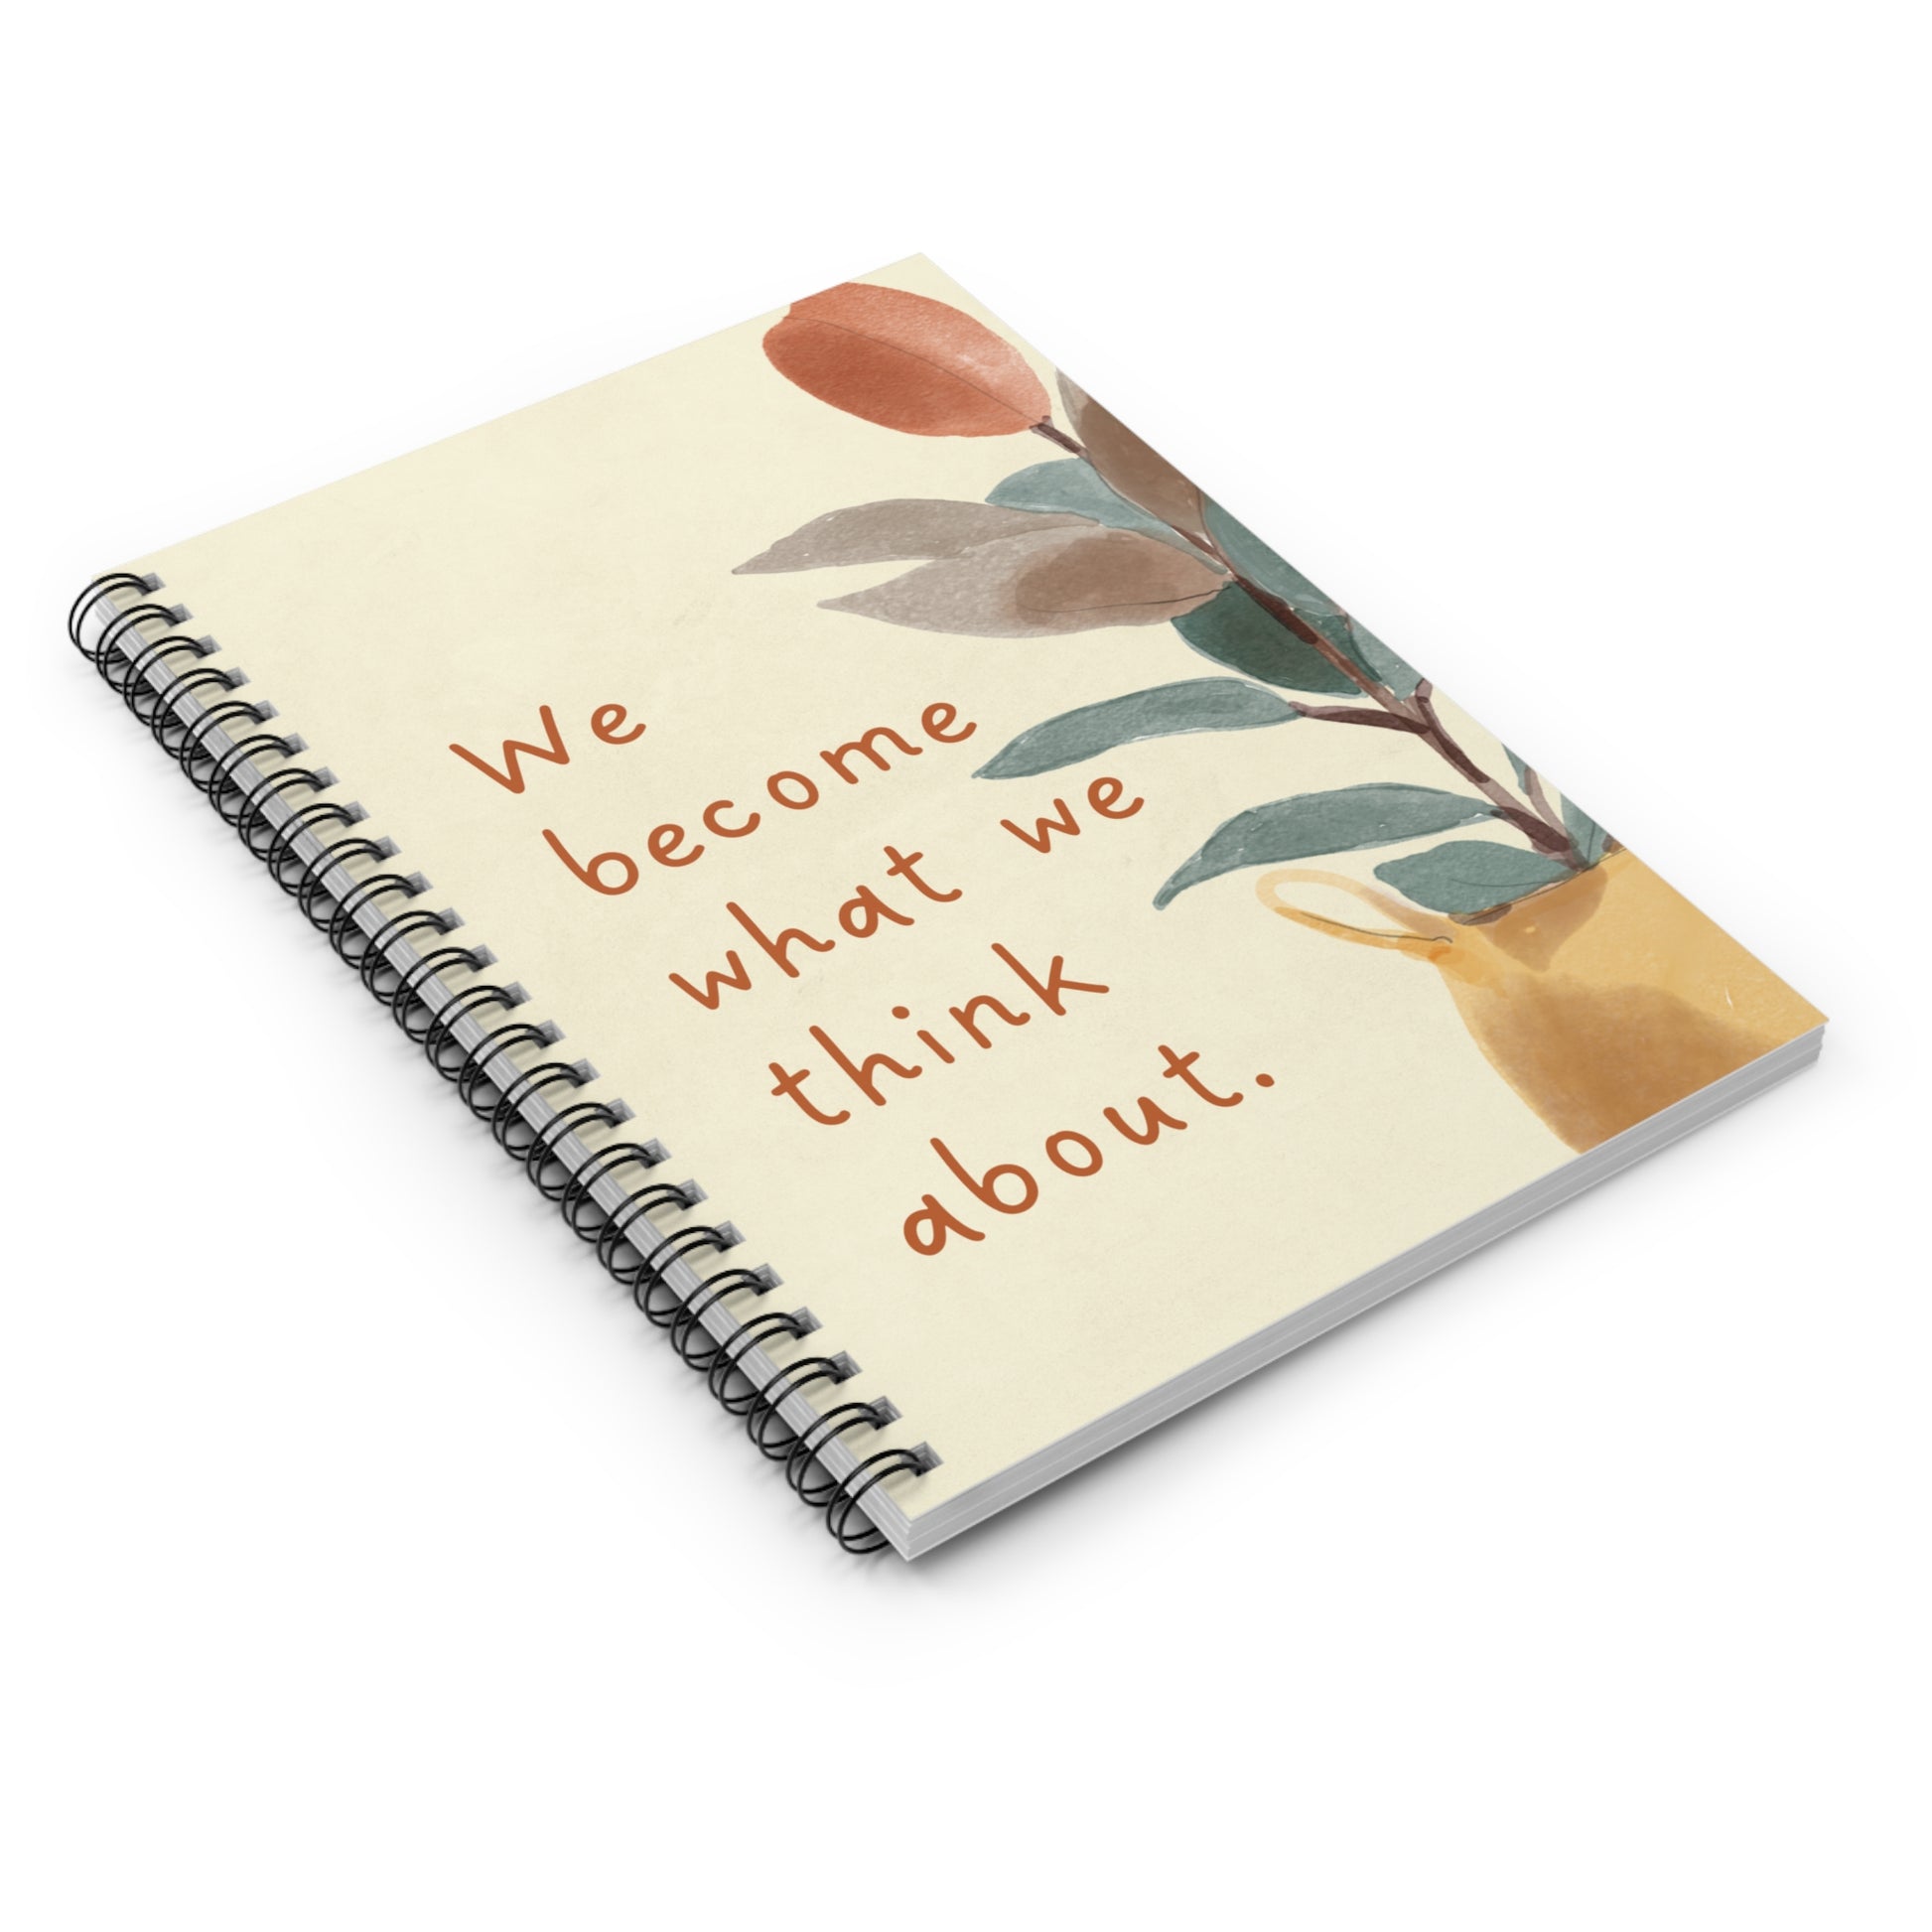 'We Become What We Think About' Spiral Notebook - For Dreamers, Thinkers & Doers - 689 Designs